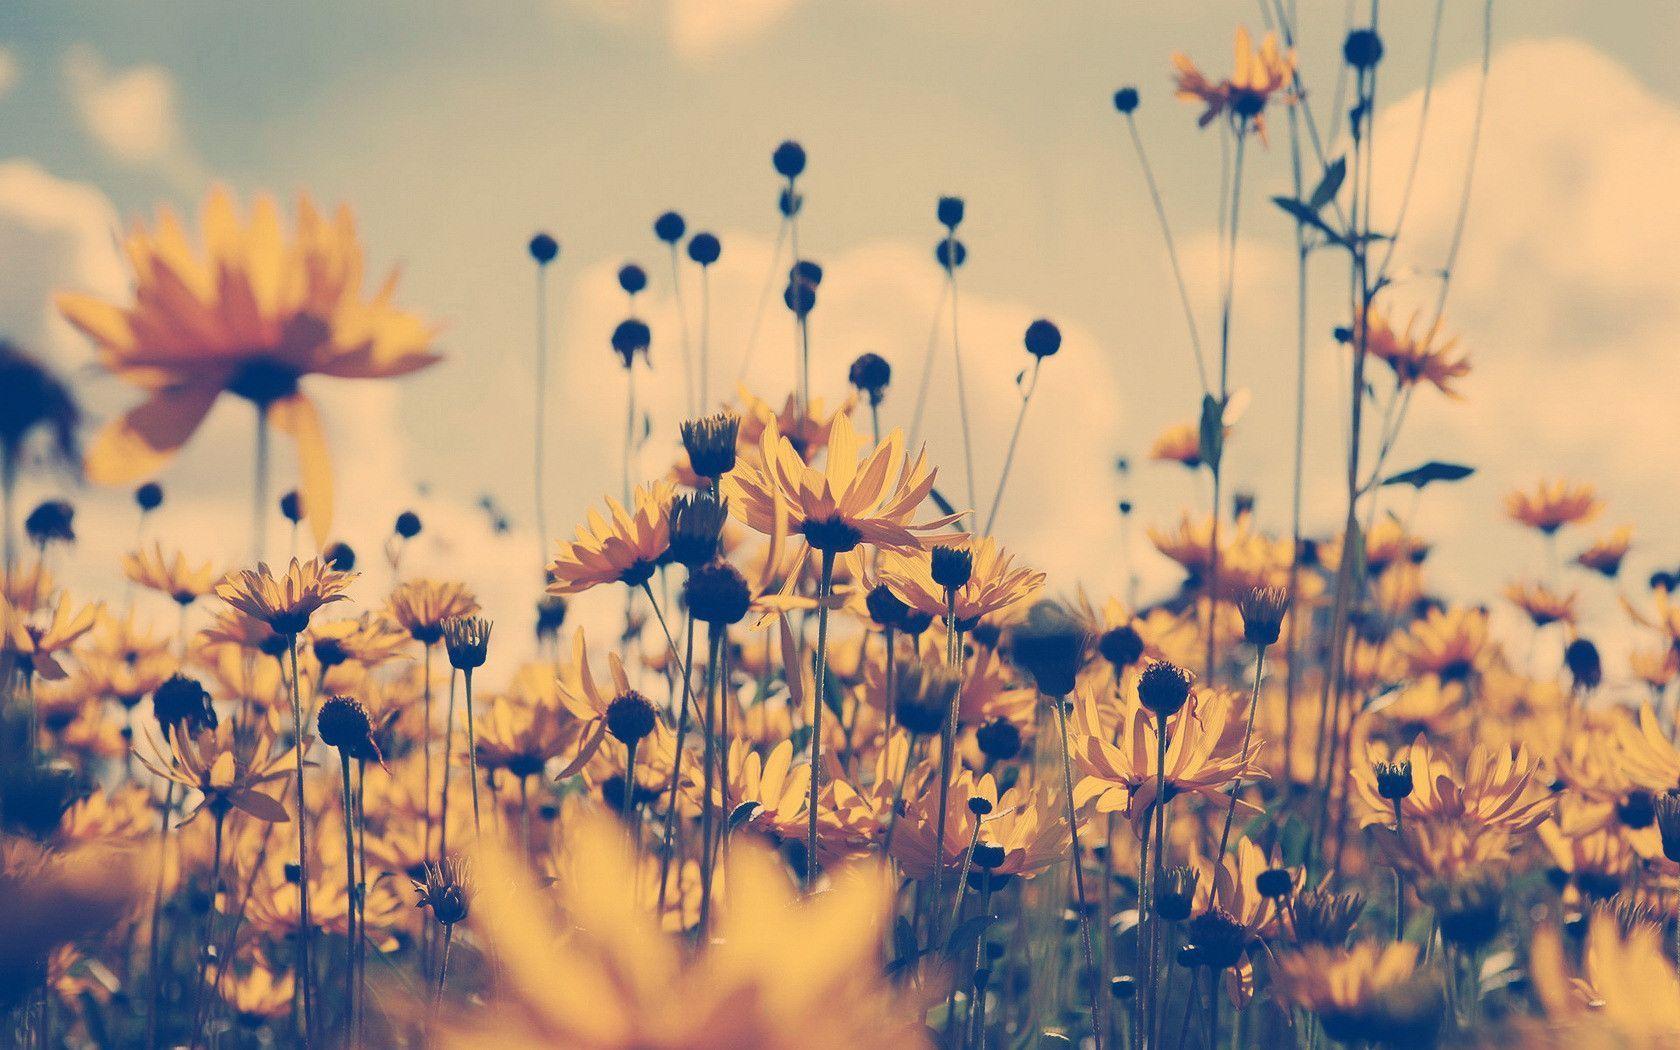 Vintage Sunflowers Wallpaper. Download High Quality Resolution